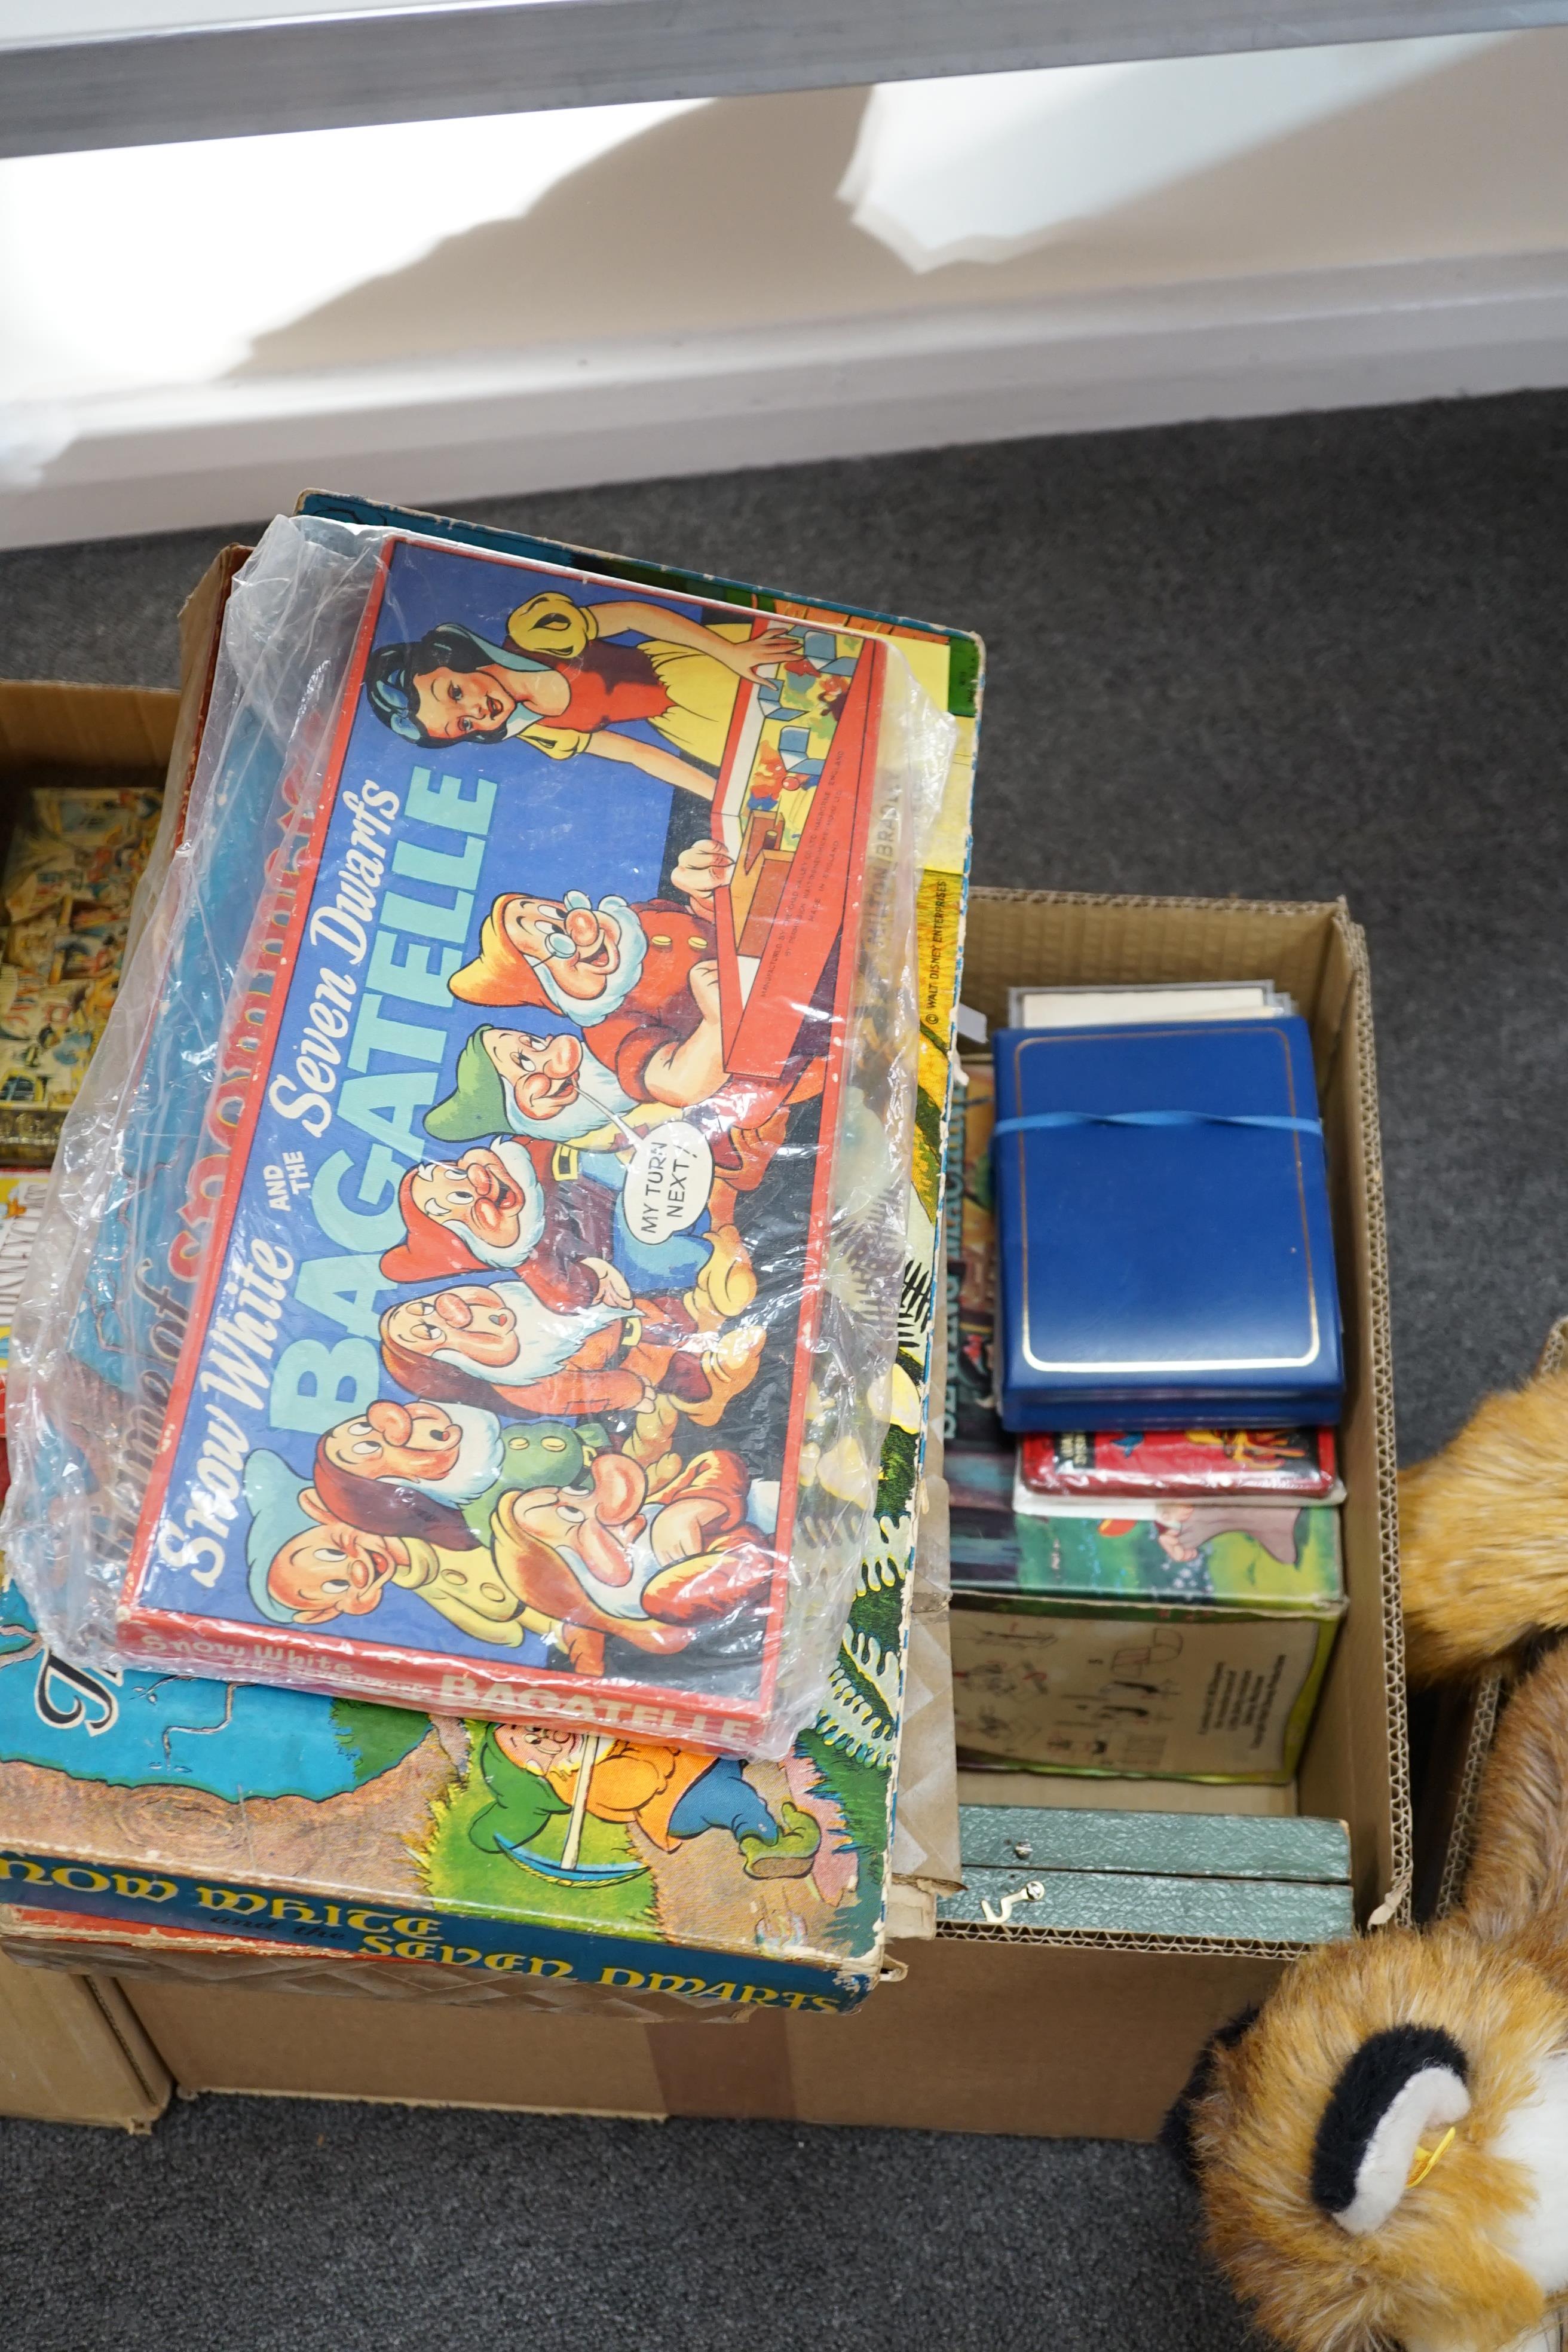 A collection of Disney Snow White memorabilia including; board games, a bagatelle board, jigsaw - Image 2 of 3